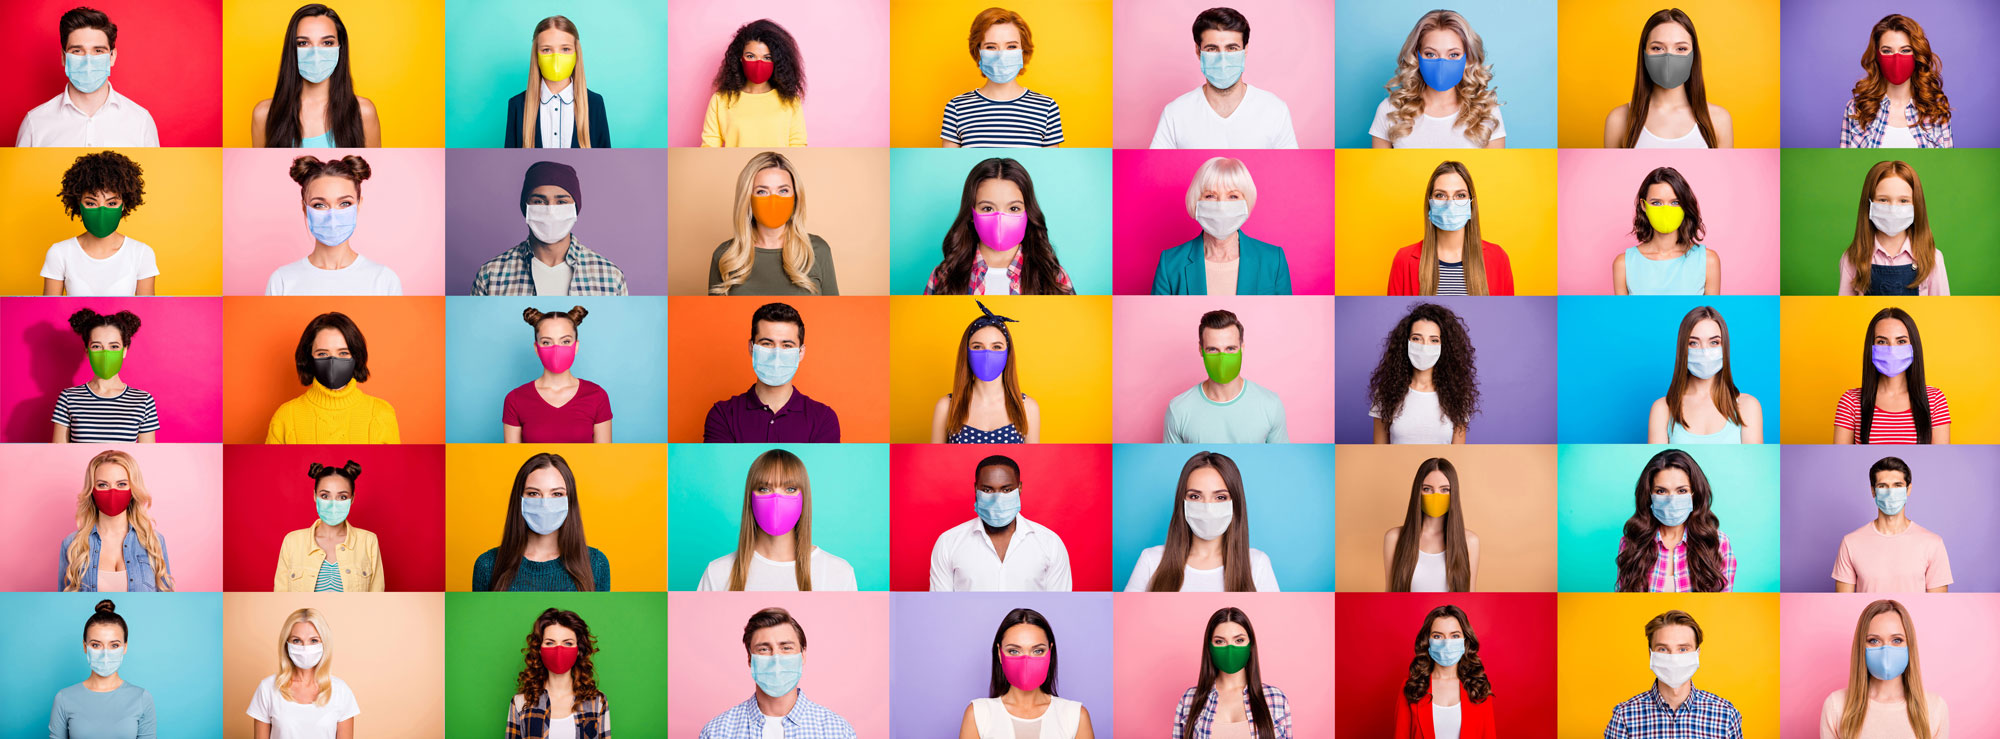 Diverse group of people wearing different colored masks with different colored backgrounds.